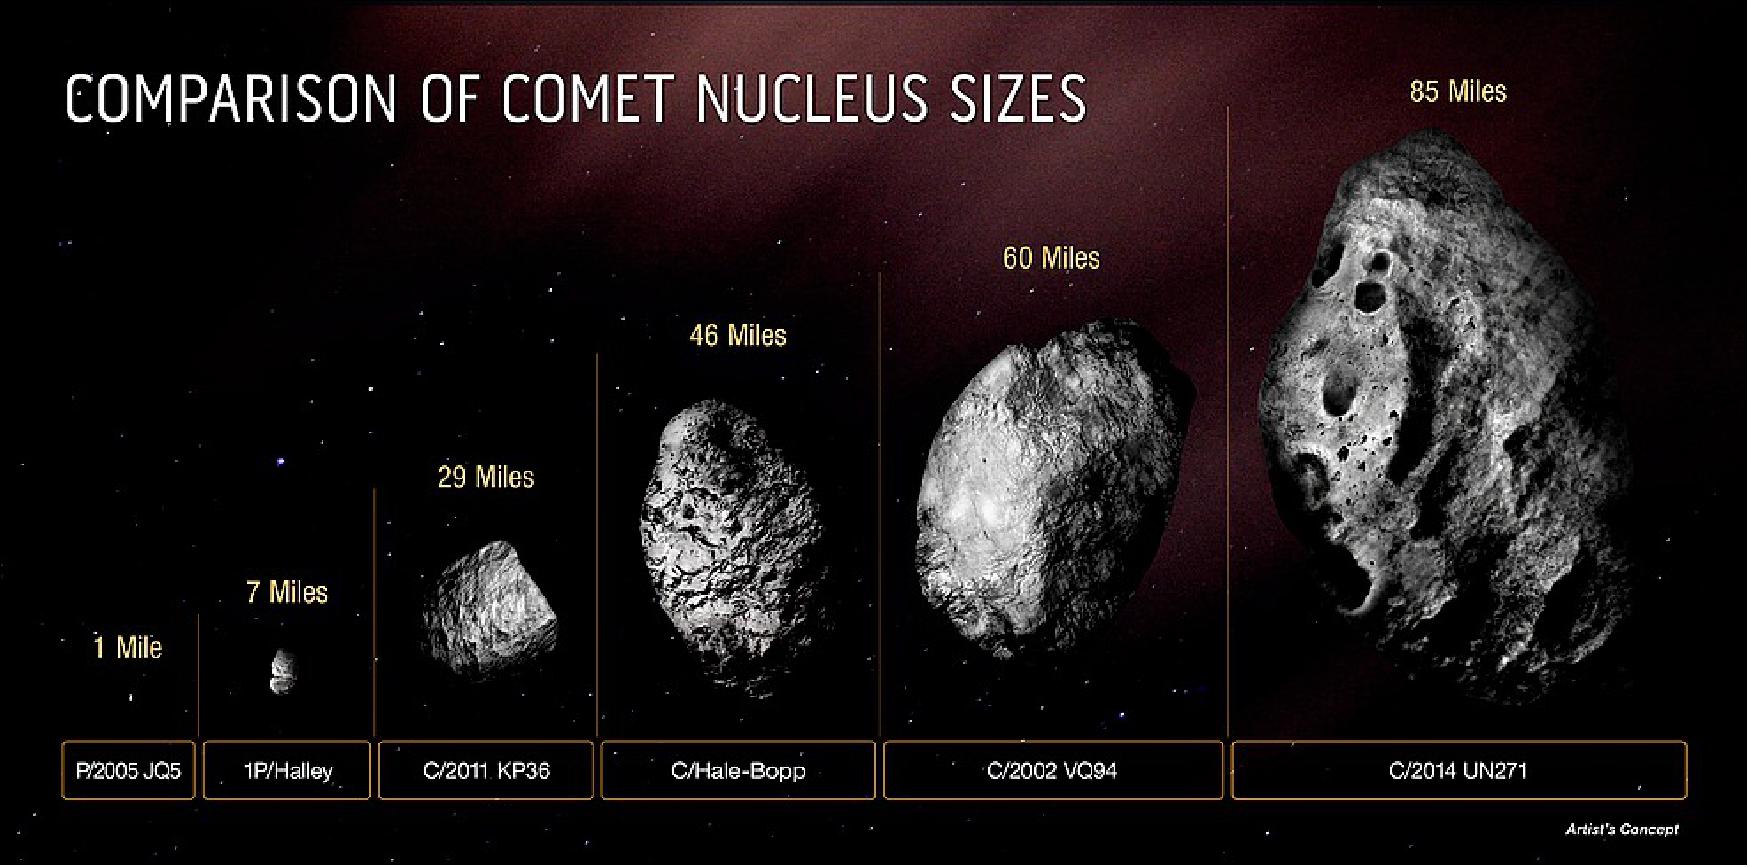 Figure 57: This diagram compares the size of the icy, solid nucleus of comet C/2014 UN271 (Bernardinelli-Bernstein) to several other comets. The majority of comet nuclei observed are smaller than Halley’s comet. They are typically a mile across or less. Comet C/2014 UN271 is currently the record-holder for big comets. And, it may be just the tip of the iceberg. There could be many more monsters out there for astronomers to identify as sky surveys improve in sensitivity. Though astronomers know this comet must be big to be detected so far out to a distance of over 2 billion miles from Earth, only the Hubble Space Telescope has the sharpness and sensitivity to make a definitive estimate of nucleus size [image credits: Illustration: NASA, ESA, Zena Levy (STScI)]